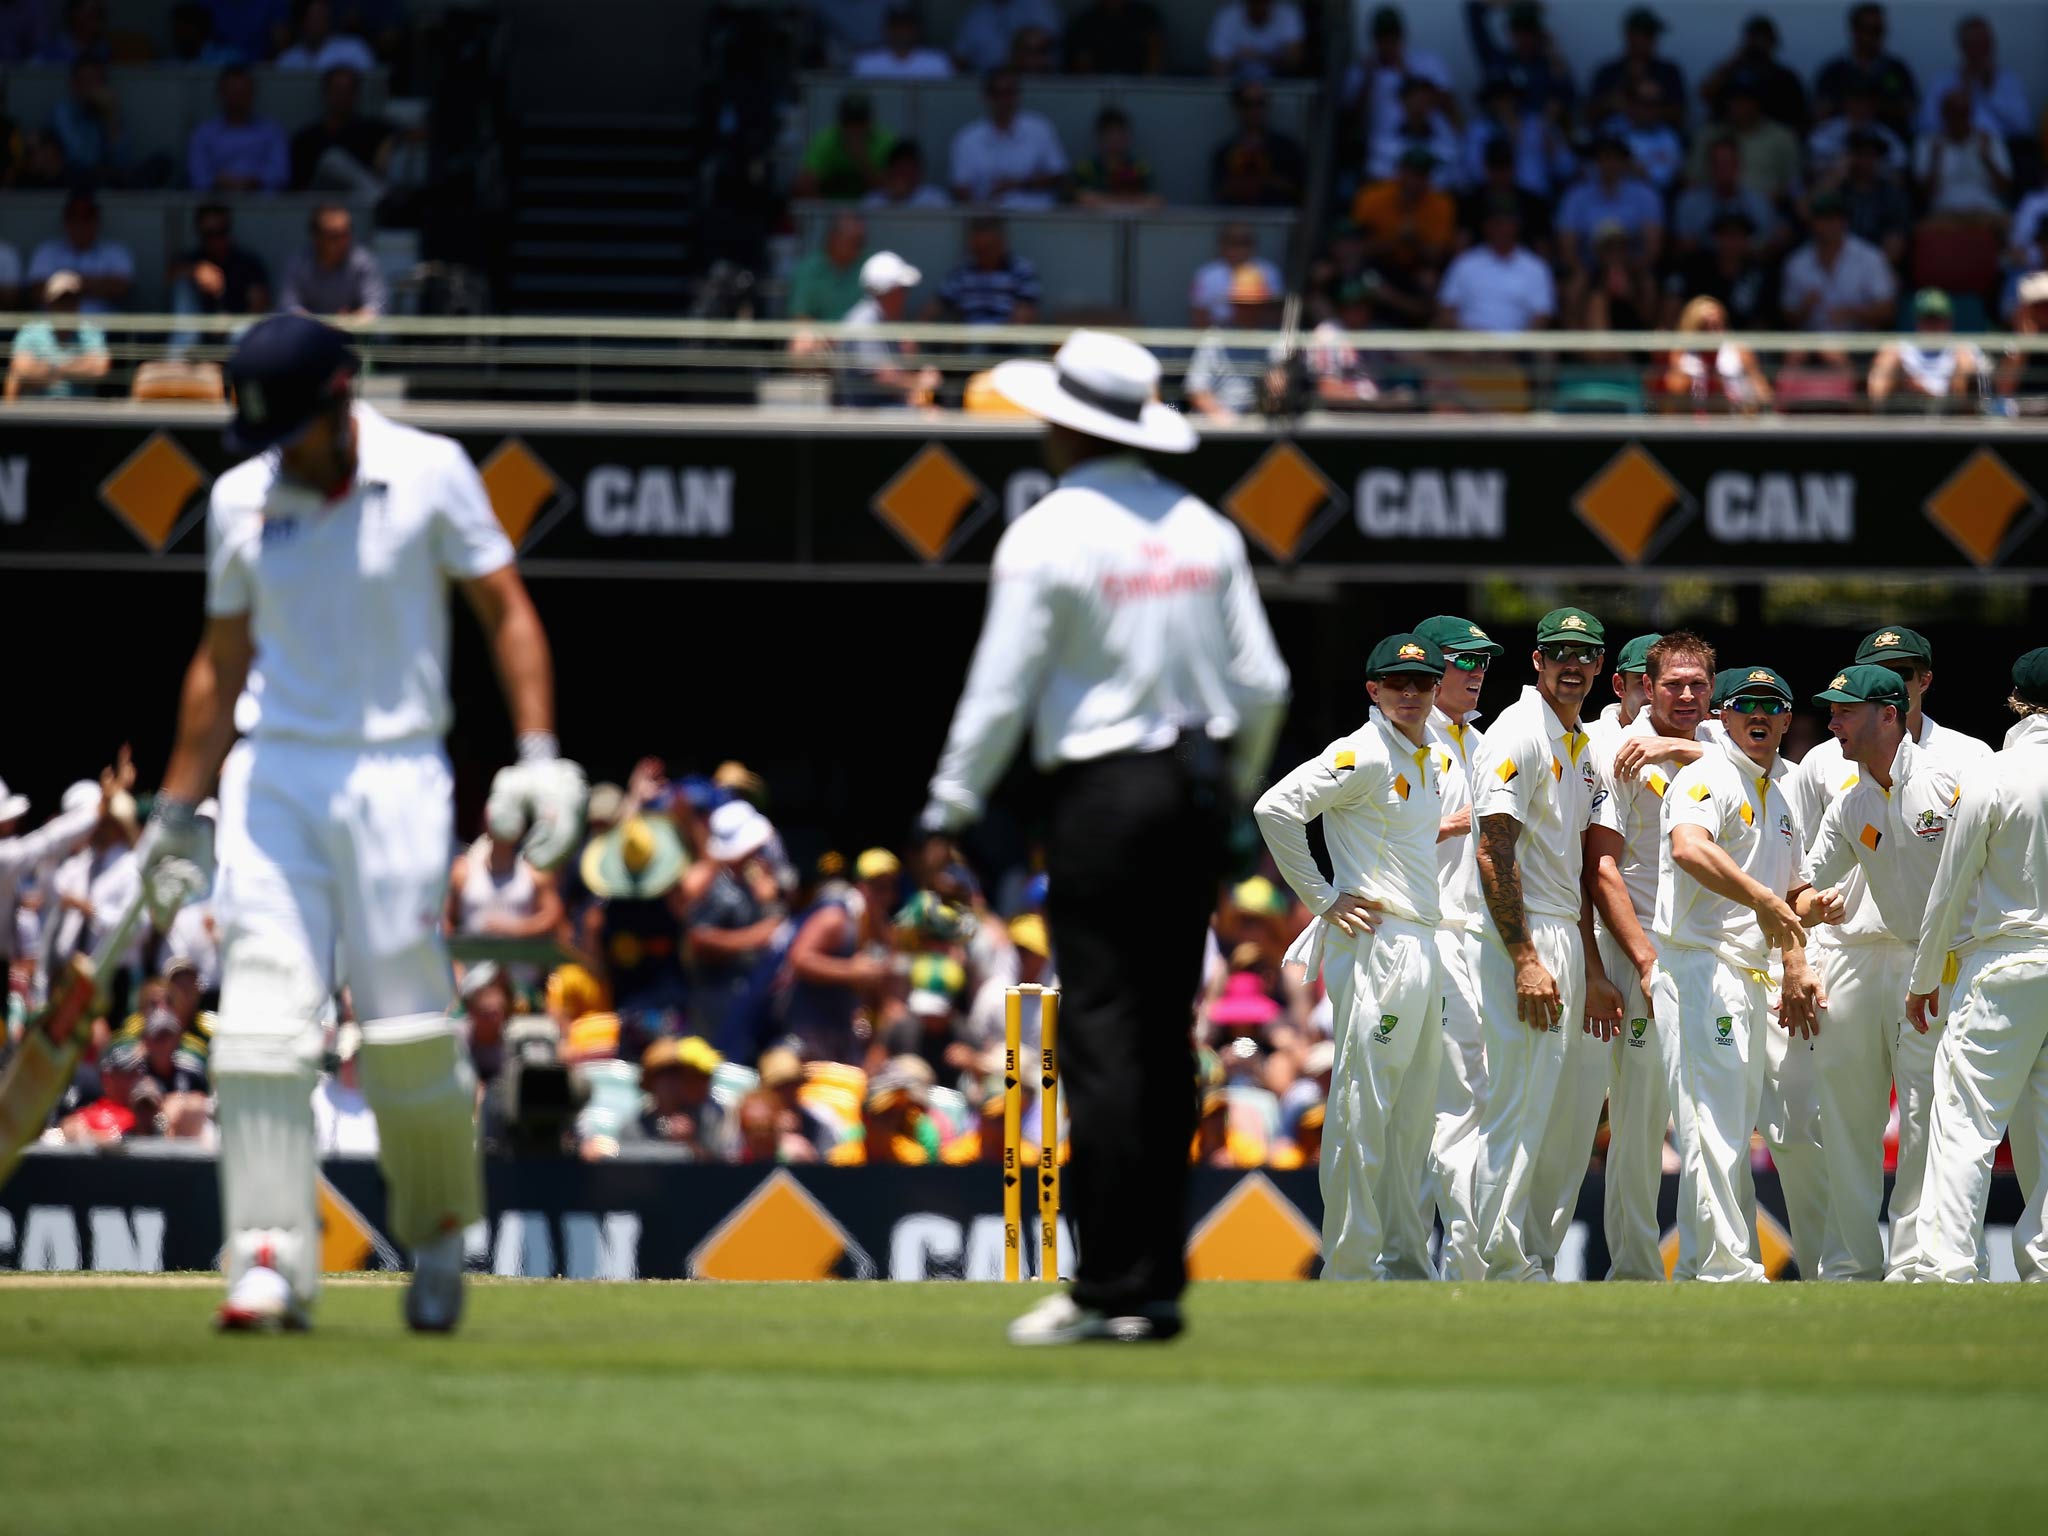 The Australians celebrate after Ryan Harris of Australia claimed the wicket of Alastair Cook of England during day two of the First Ashes Test